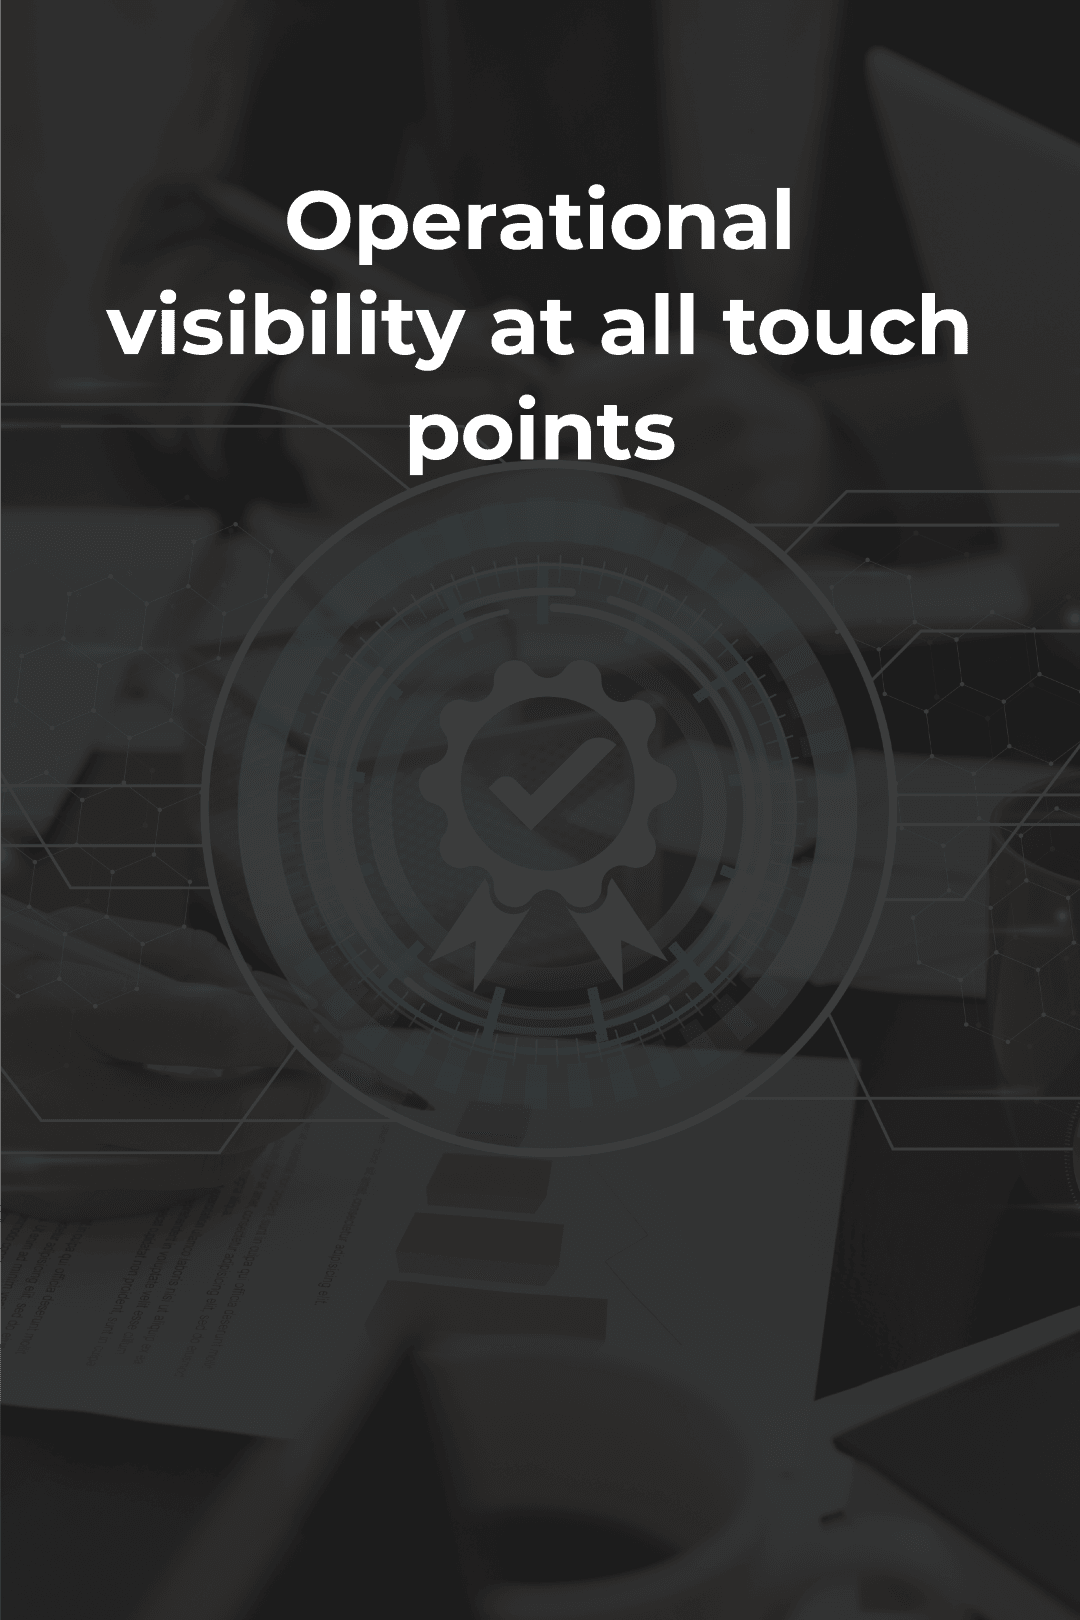 Operational visibility at all touch points